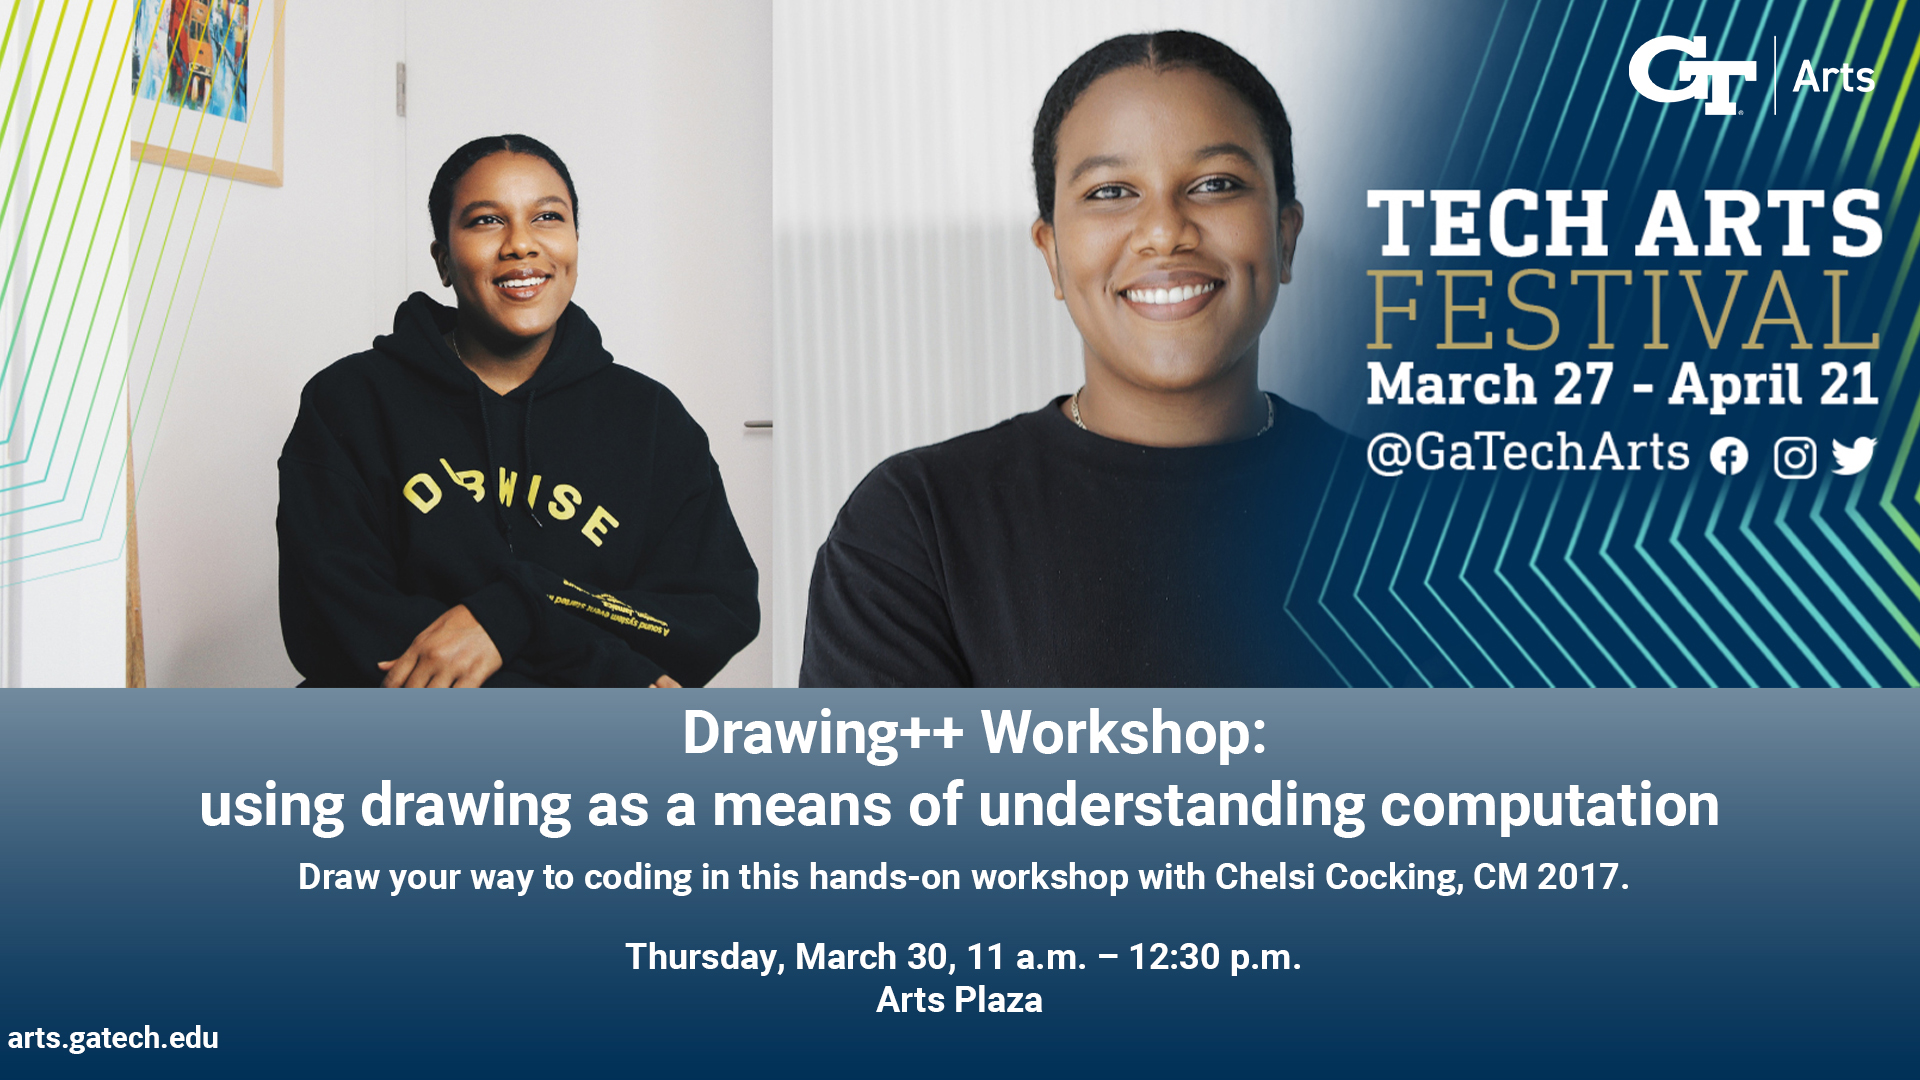 &lt;p&gt;As part of Tech Arts Festival, Georgia Tech alumna Chelsi Cocking, CM 2017, leads Drawing++ Workshop: using drawing as a means of understanding computation. A project of Georgia Tech Arts.&lt;/p&gt;
